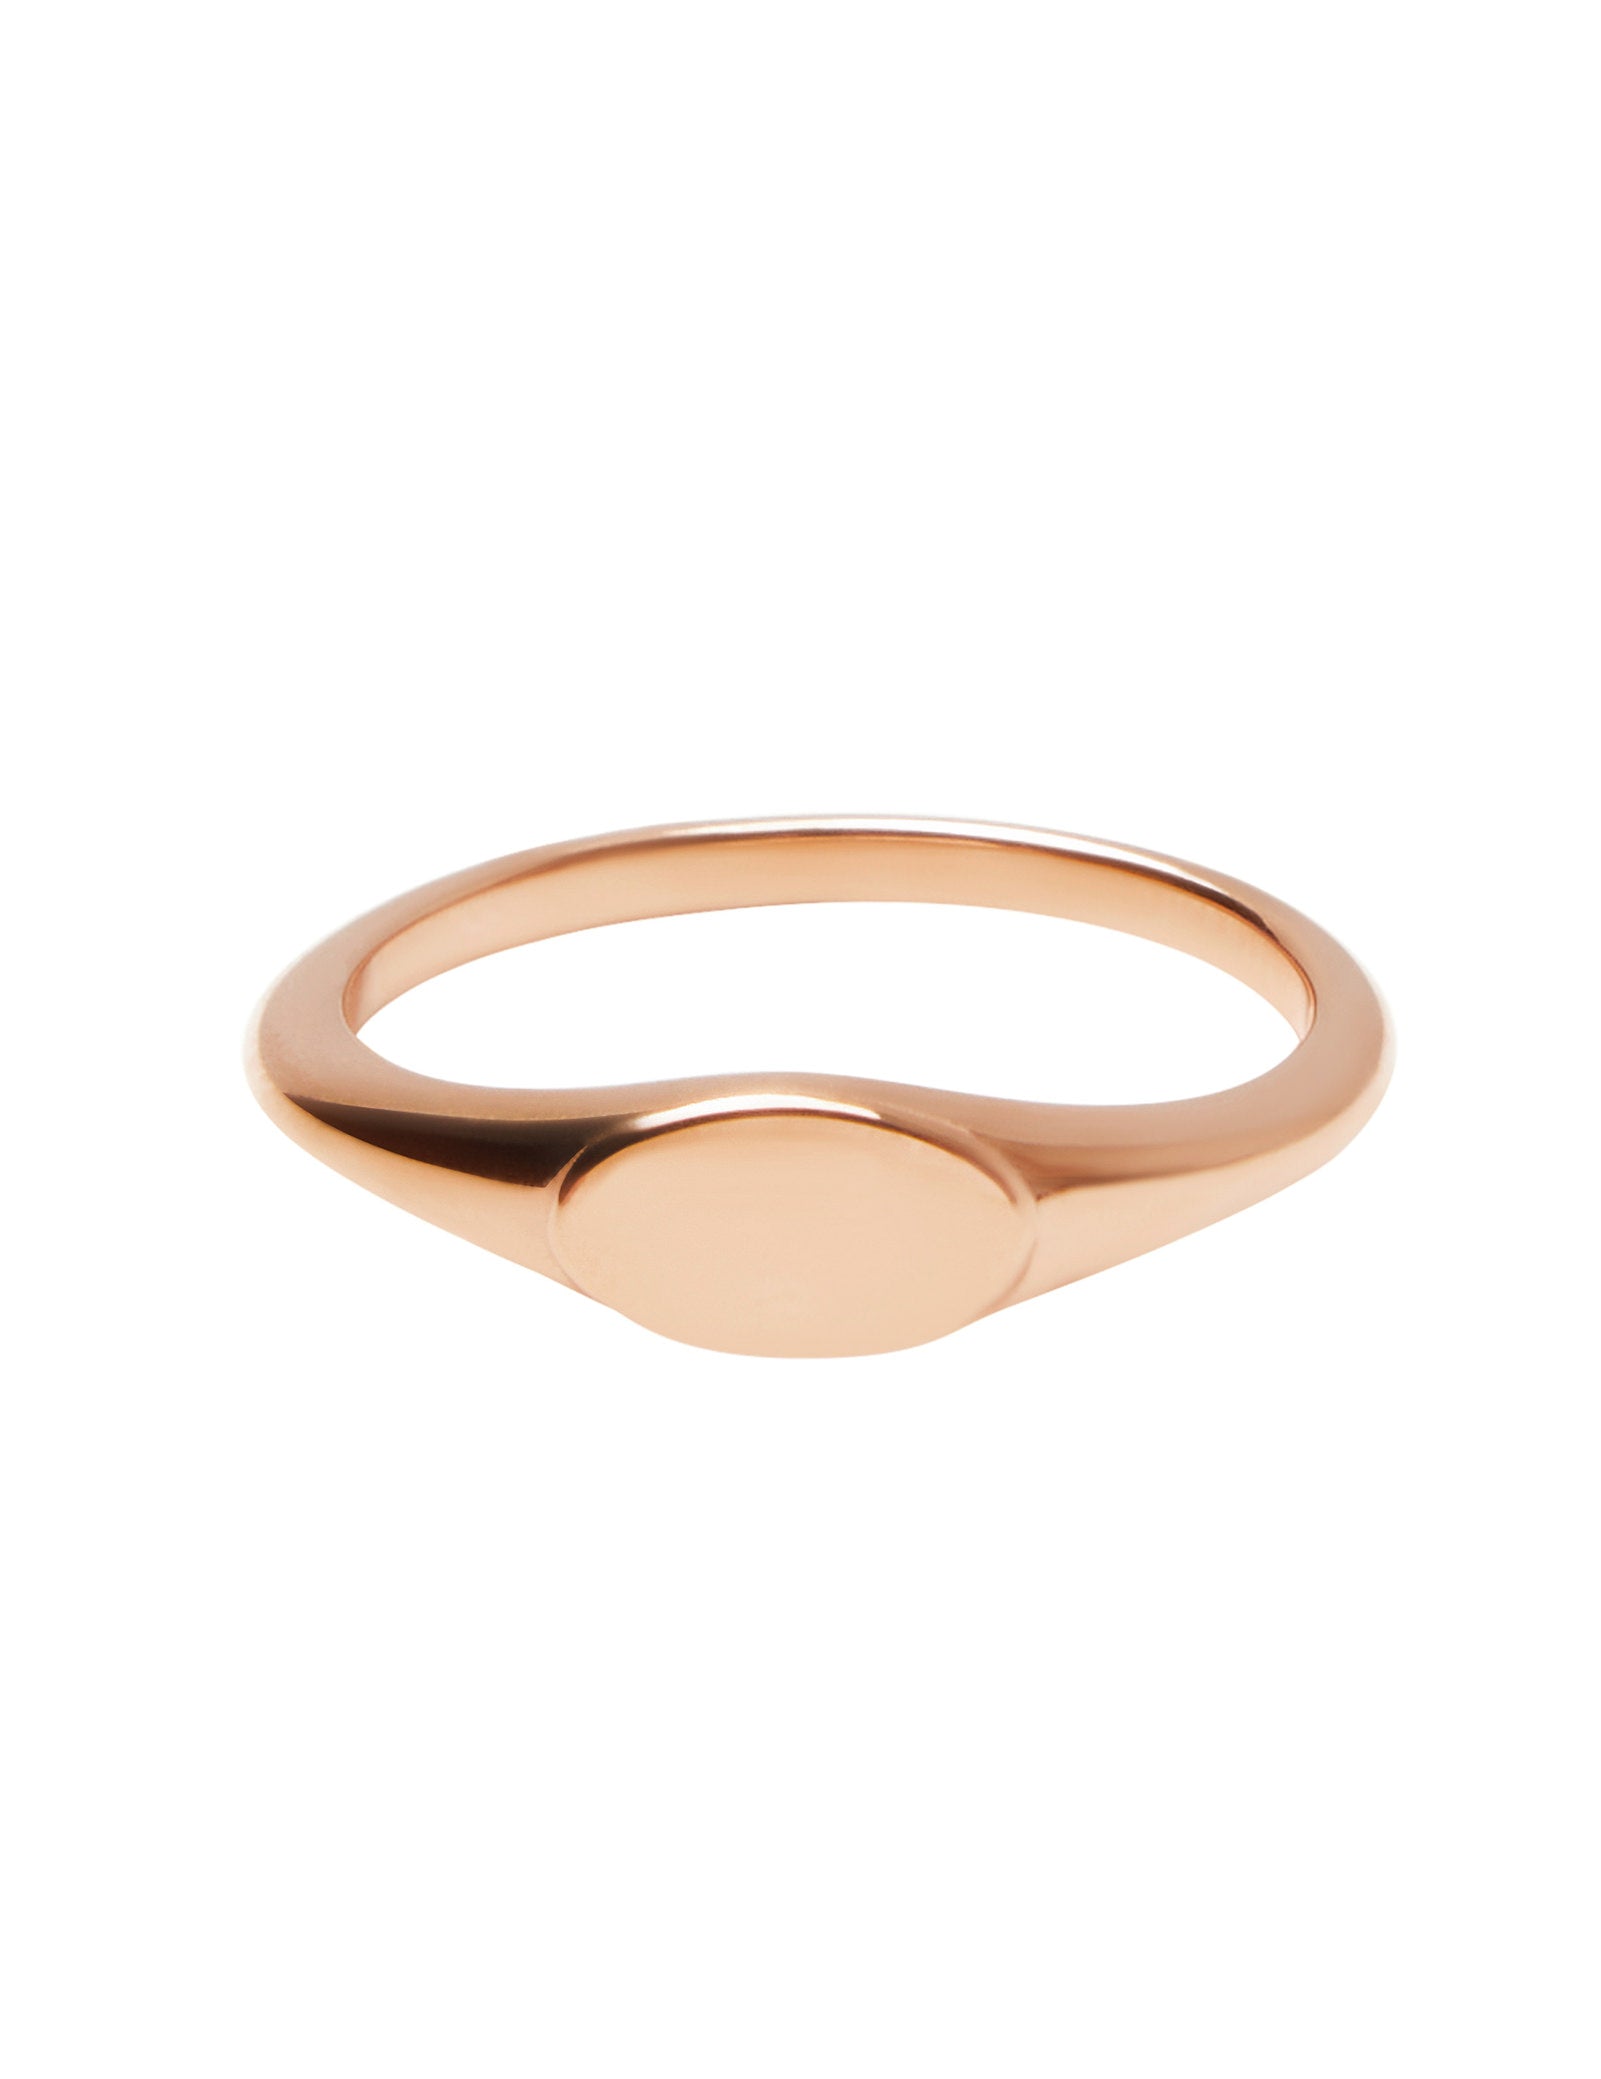 Pastiche  Radiance Ring - R1219RG-N